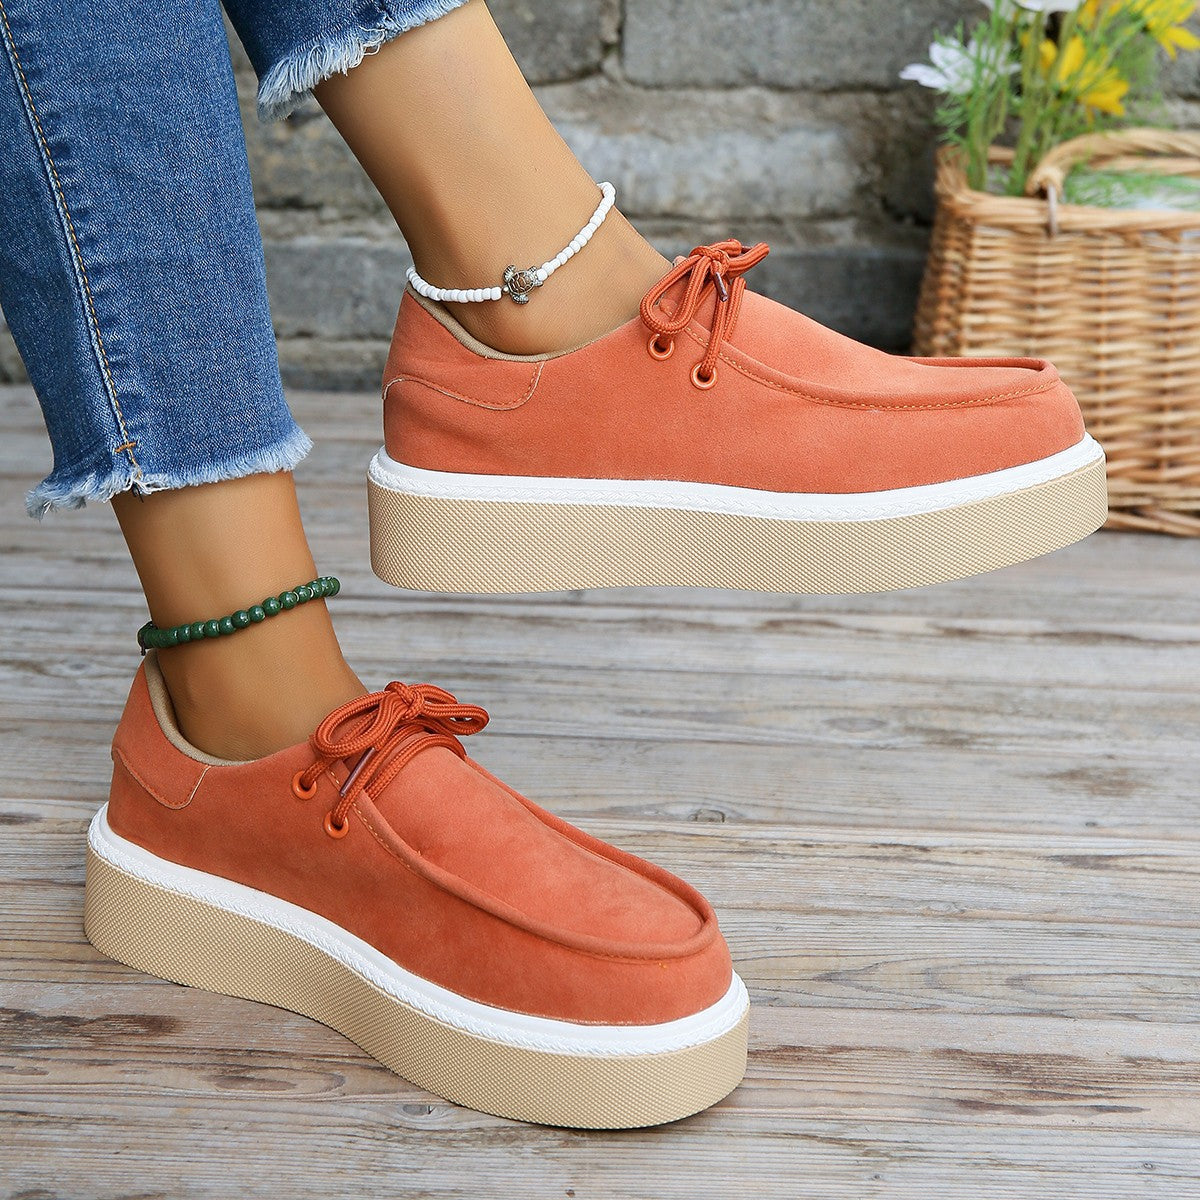 Sneakers  | New Thick Bottom Lace-up Flats Women Solid Color Casual Fashion Lightweight Sneakers | Orange |  Size36| thecurvestory.myshopify.com